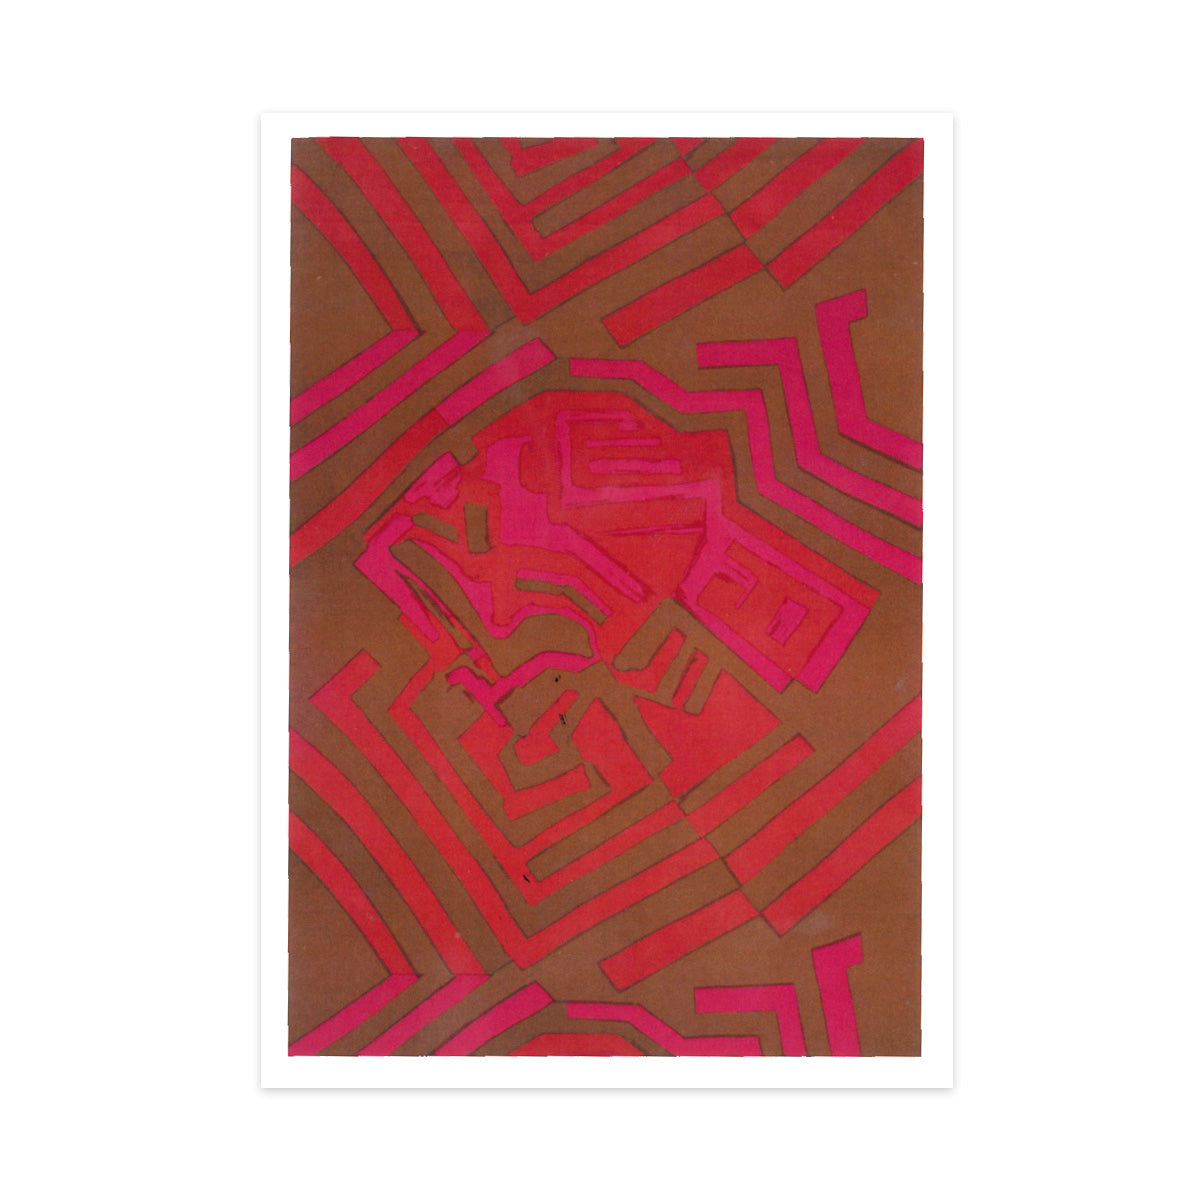 Greetings card featuring a pink and red geometric design by Shirley Craven.